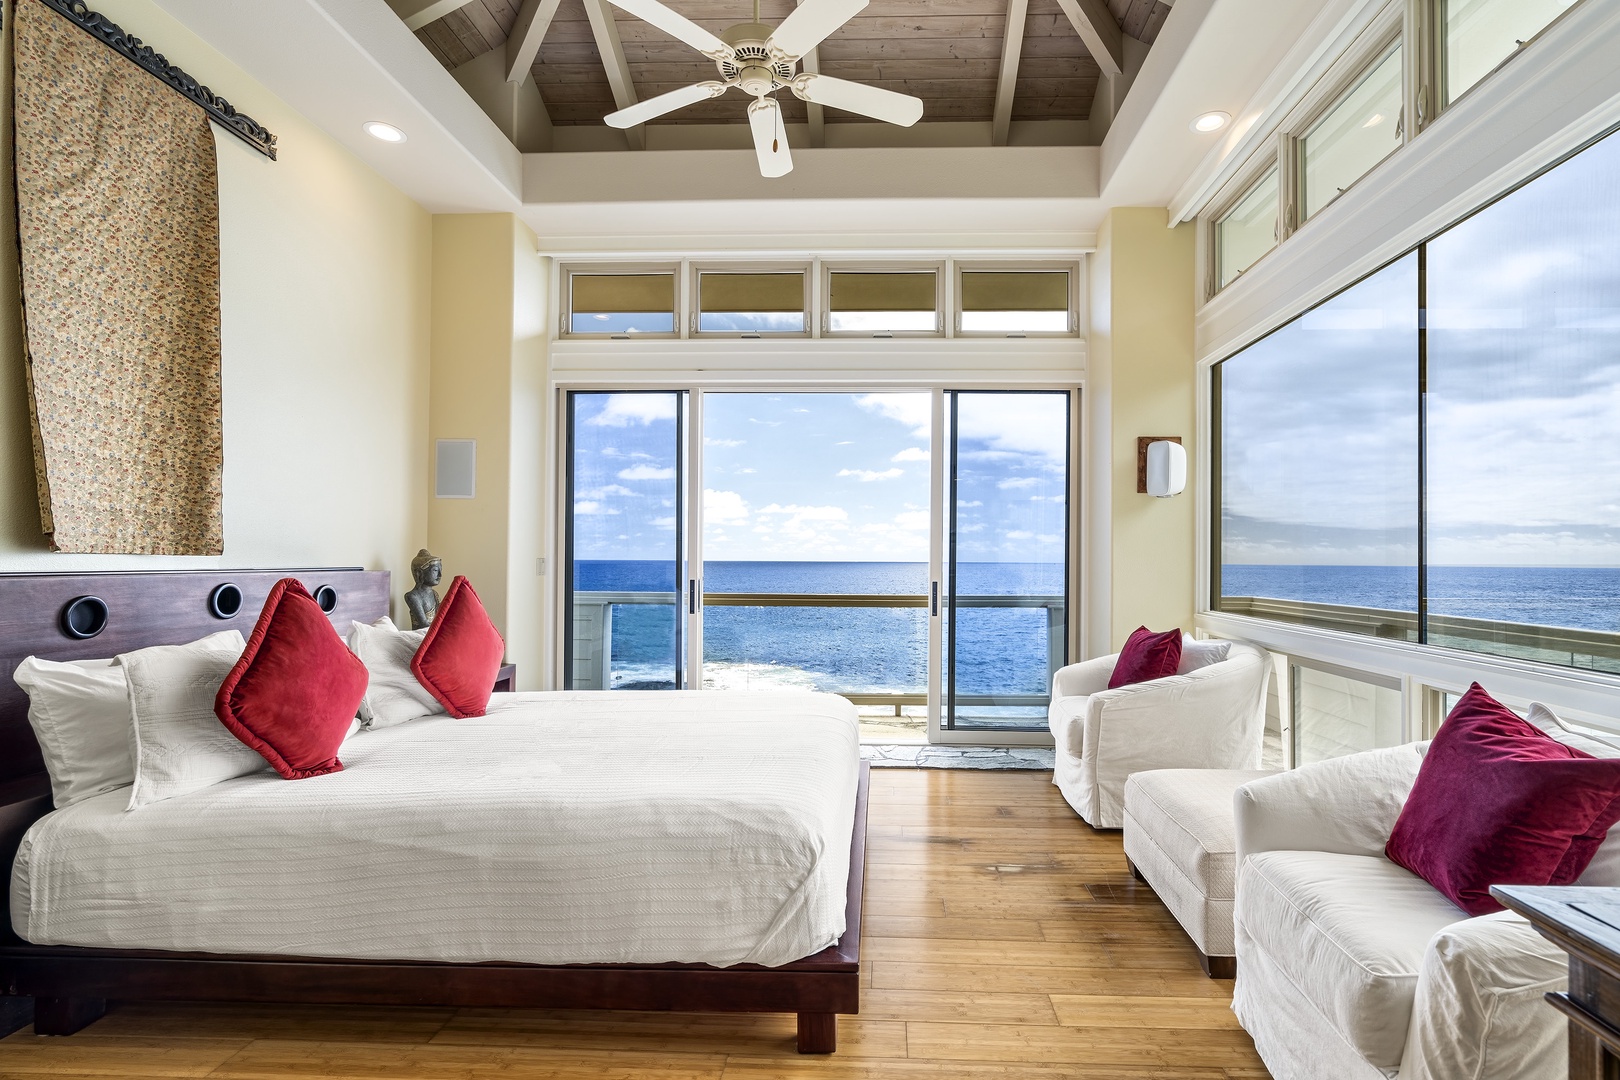 Kailua Kona Vacation Rentals, Ali'i Point #12 - Additional seating and a private balcony can also be found in the Primary bedroom